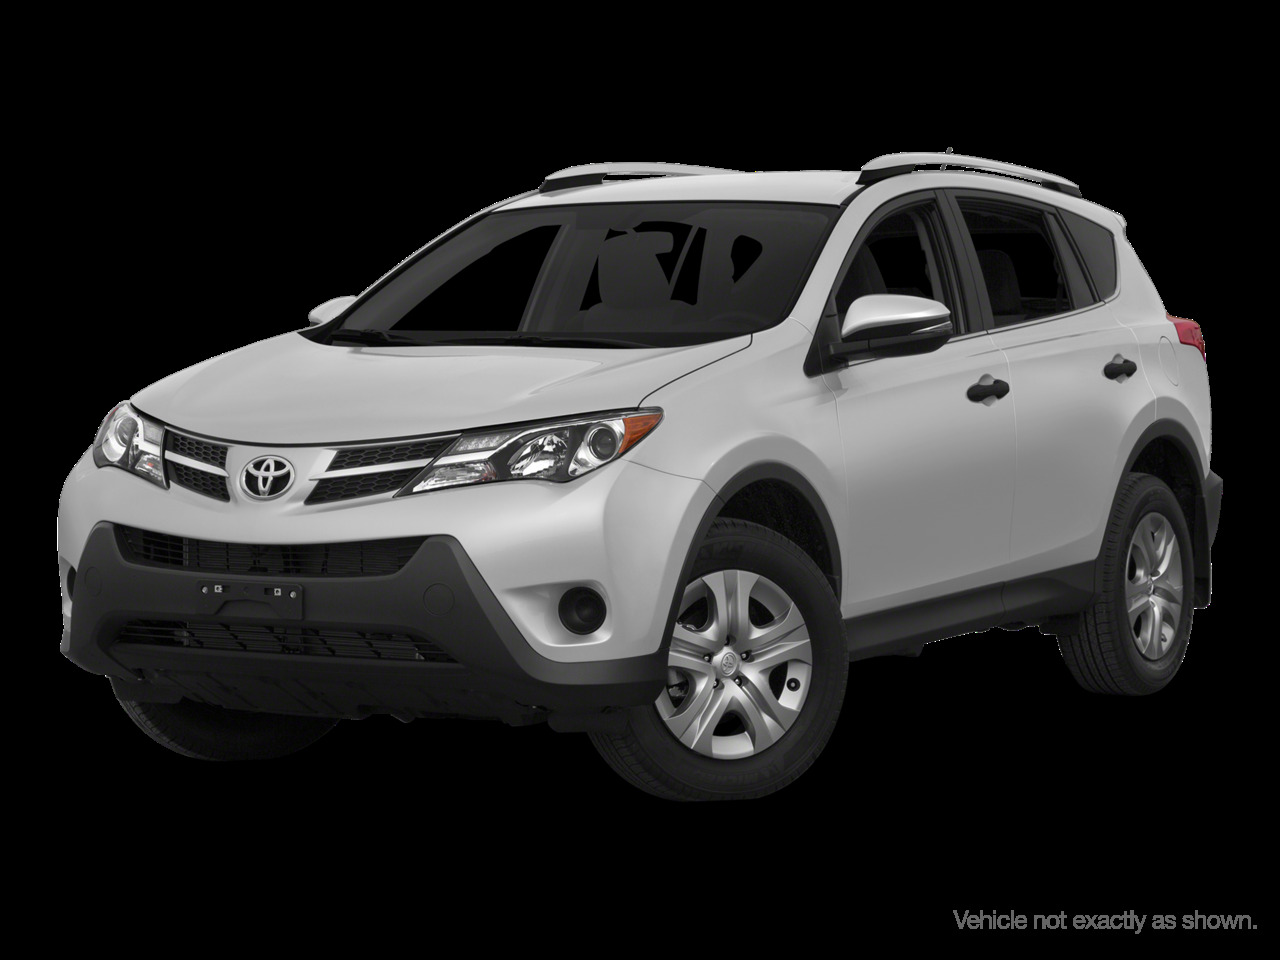 2015 Toyota RAV4 AWD LE |OpenRoad True Price |Local |One Owner |No 